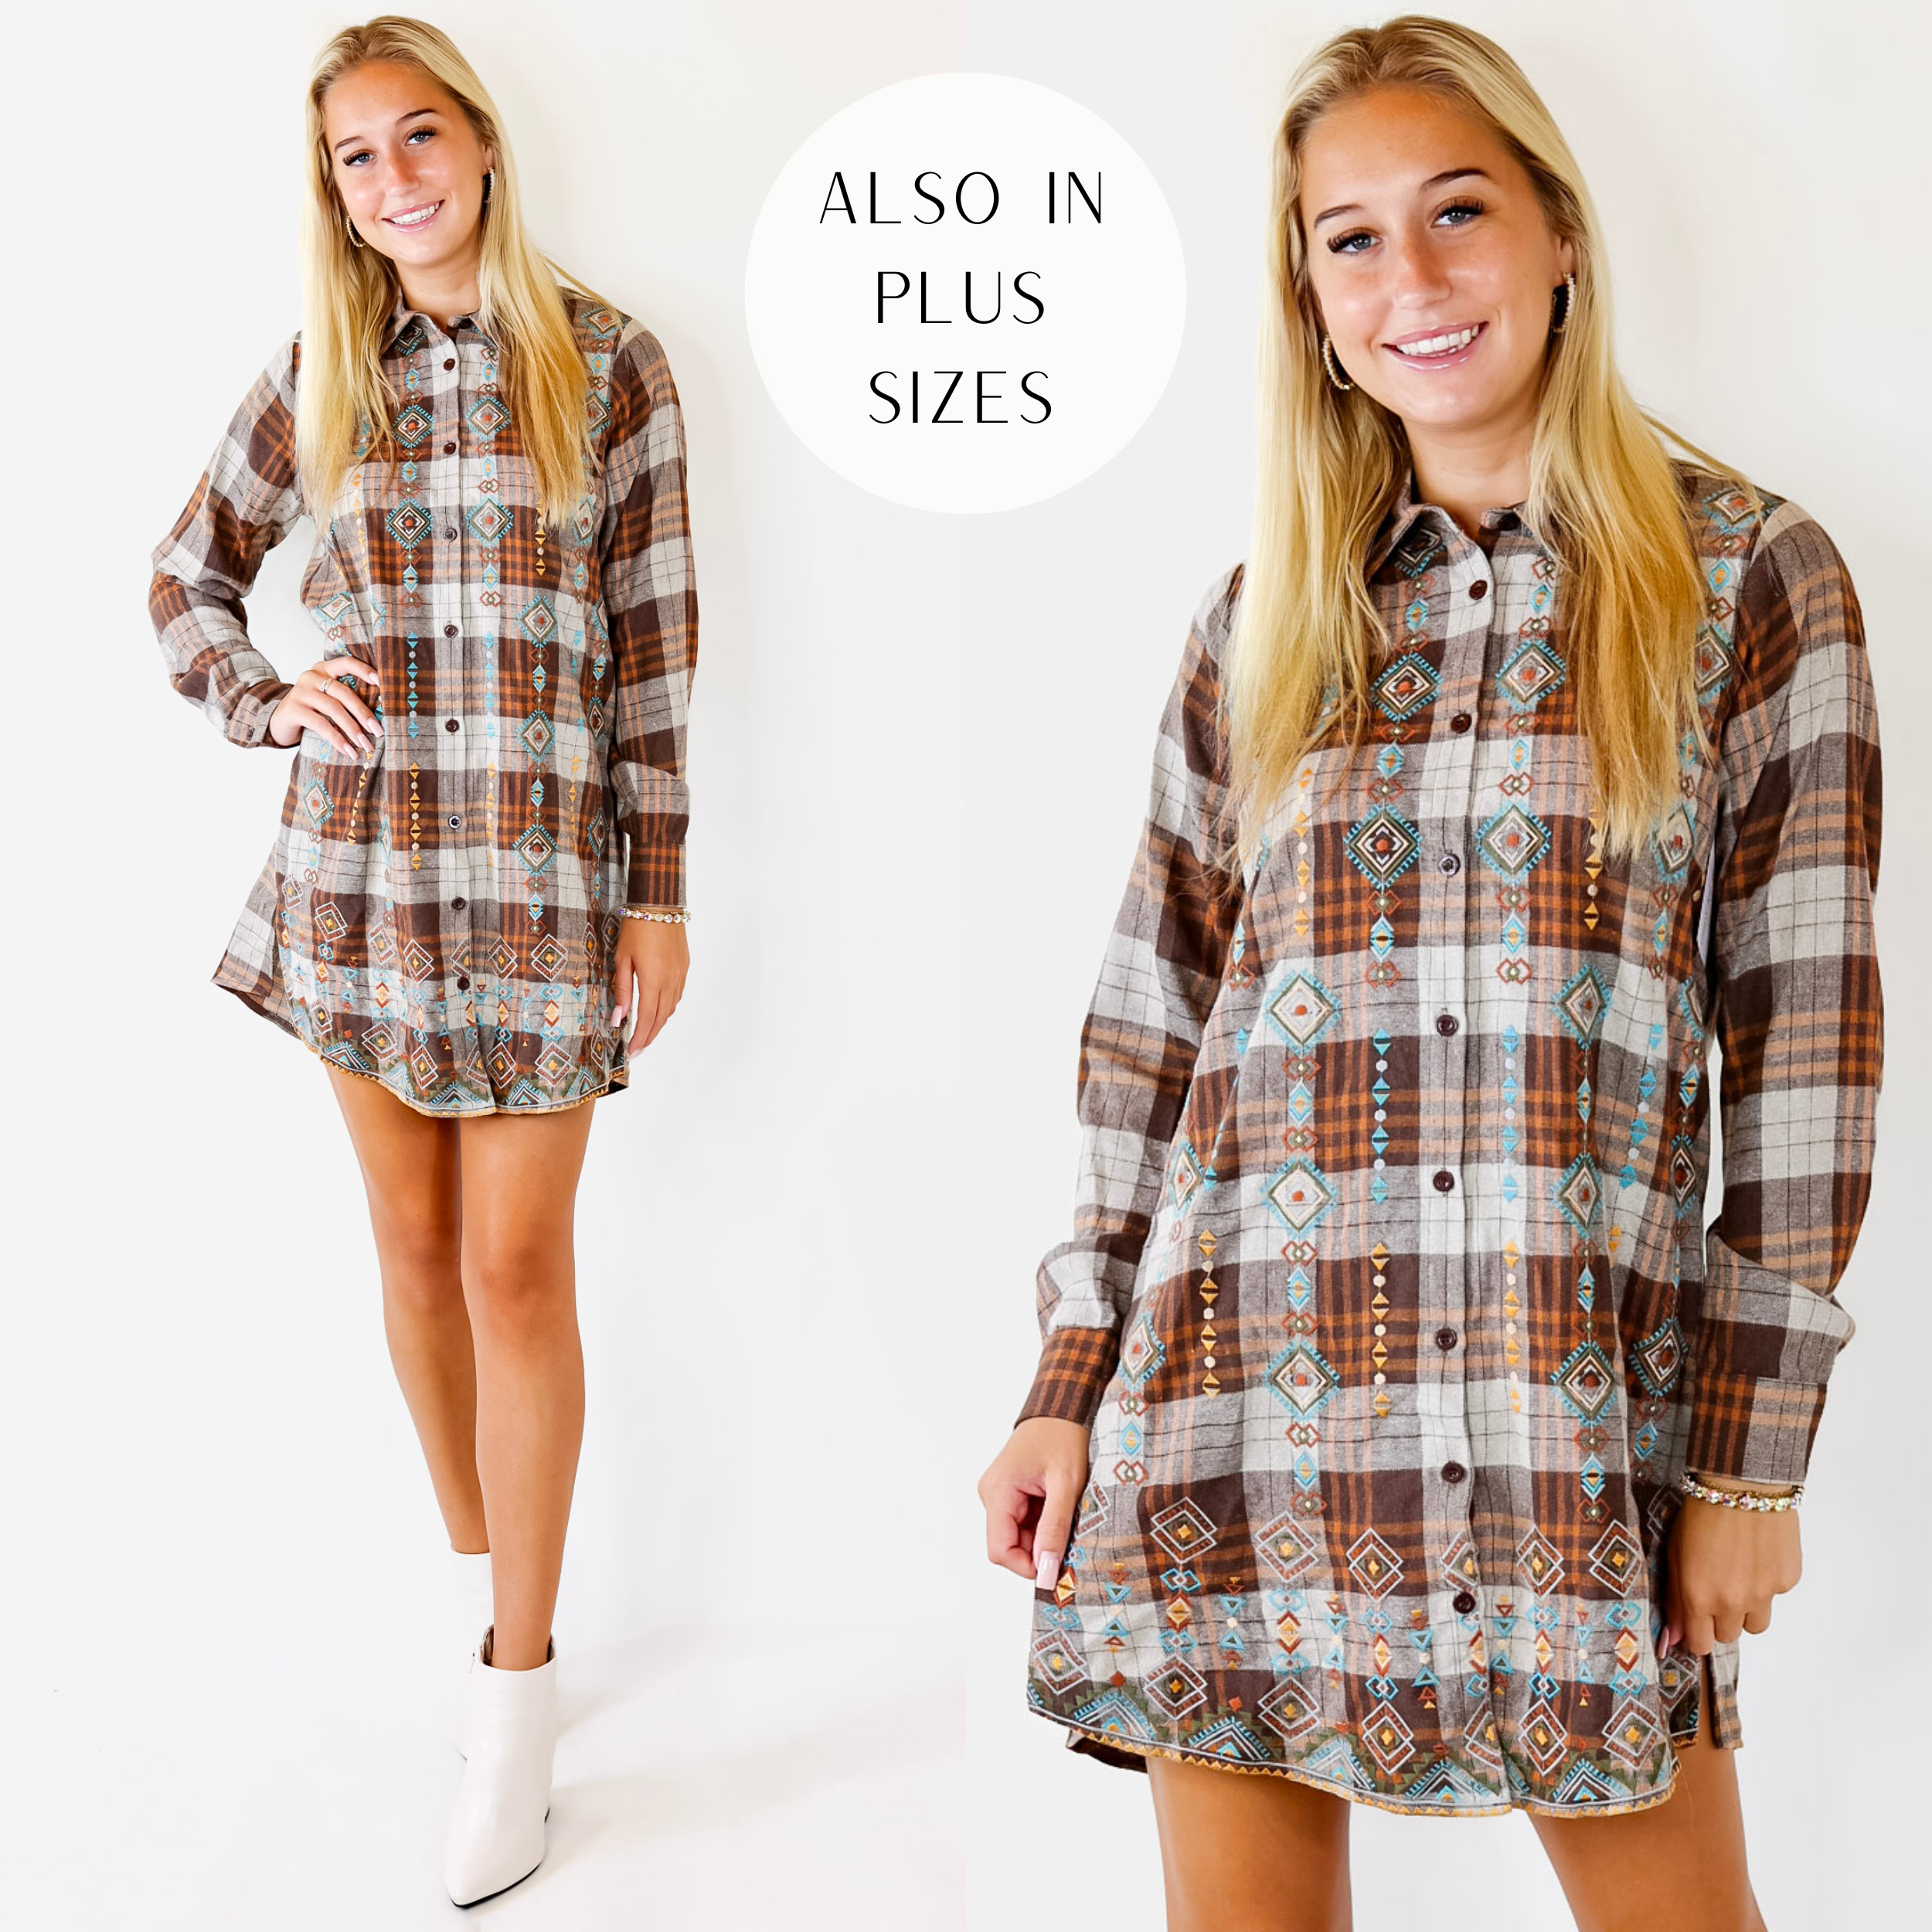 Loving In Layers Tribal Embroidered Plaid Button Up Dress in Brown Mix - Giddy Up Glamour Boutique